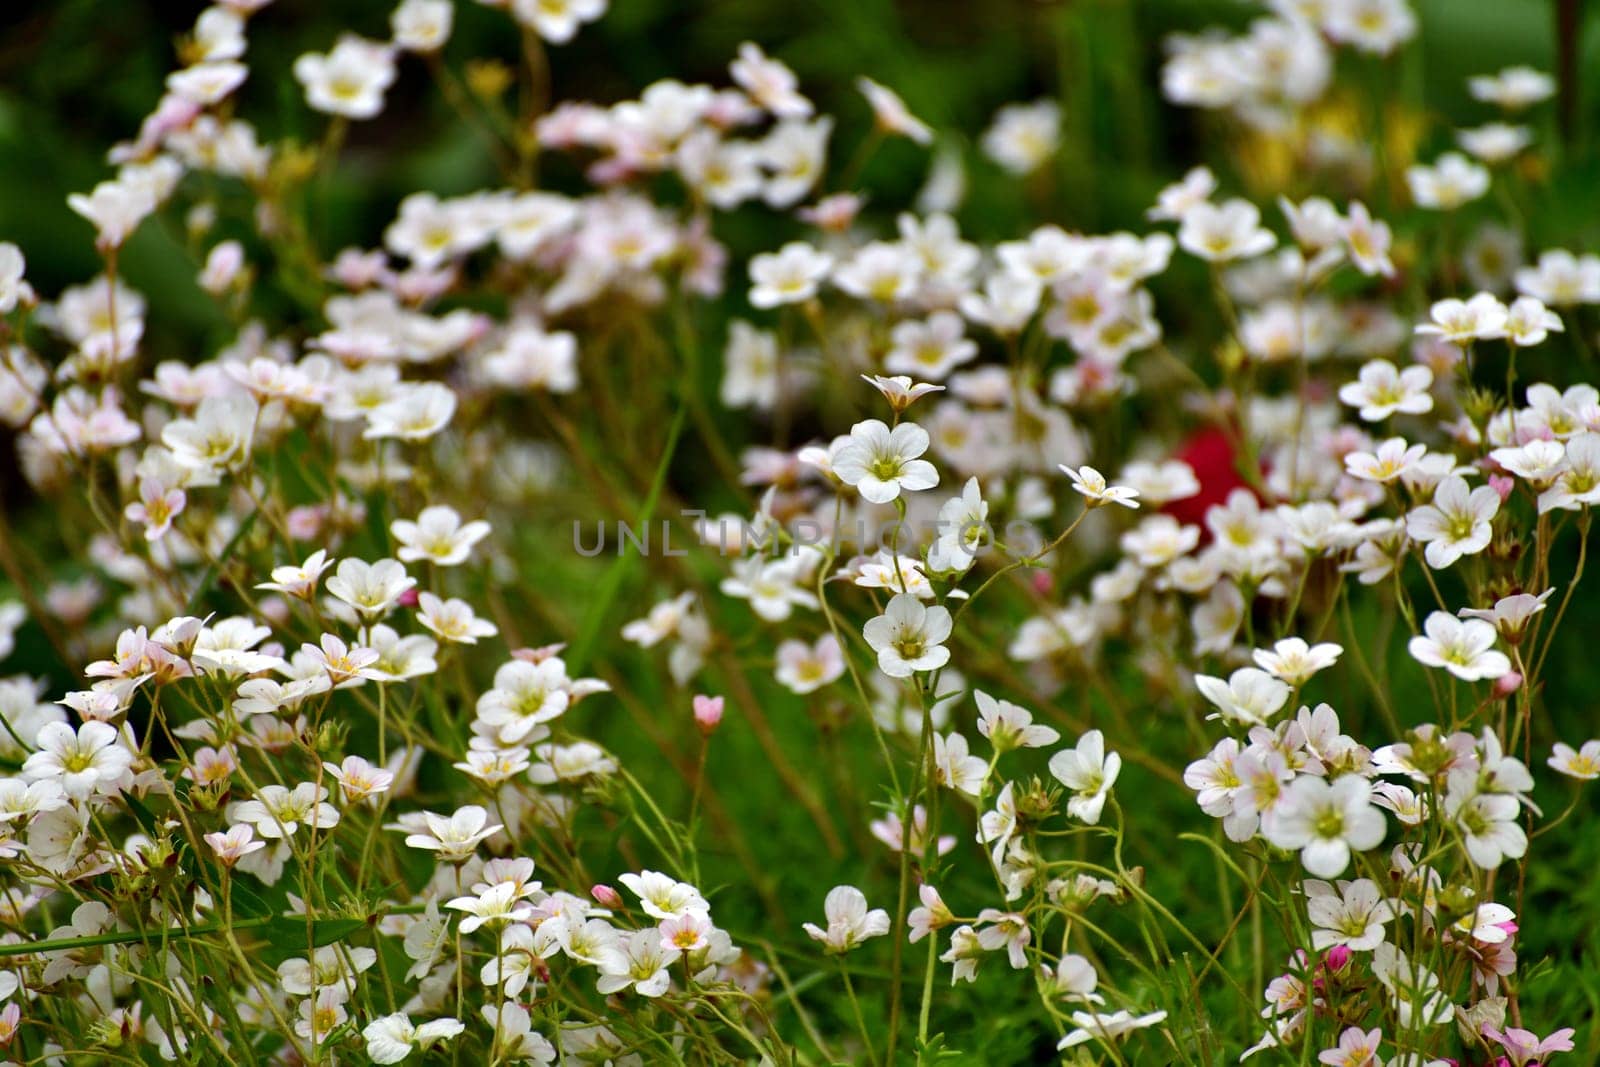 Saxifraga is ornamental herbaceous plant used for landscaping gardens.